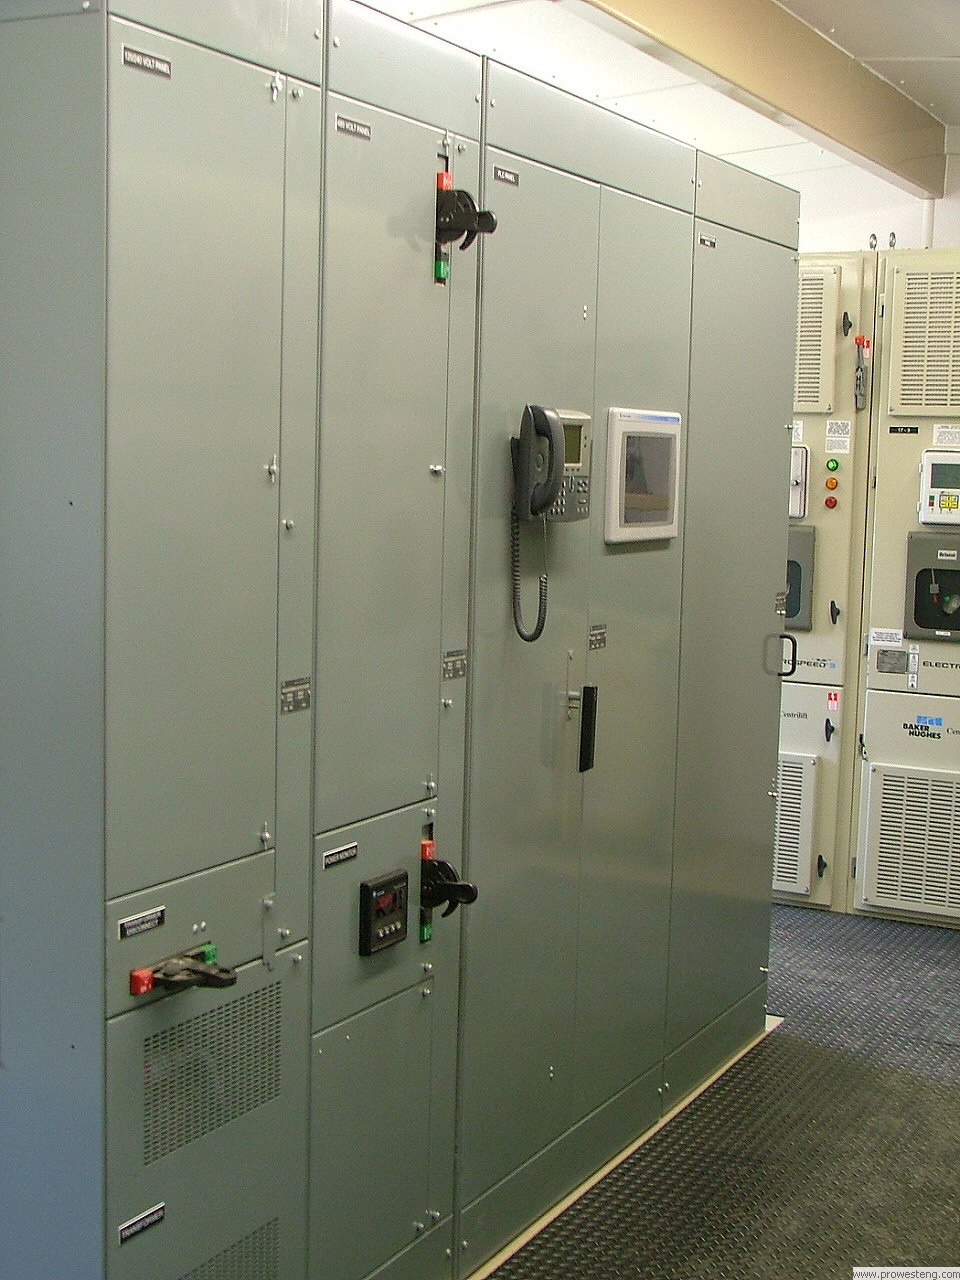 Low Voltage Motor Control Center line-up with integrated PLC control panel and communications equipment.